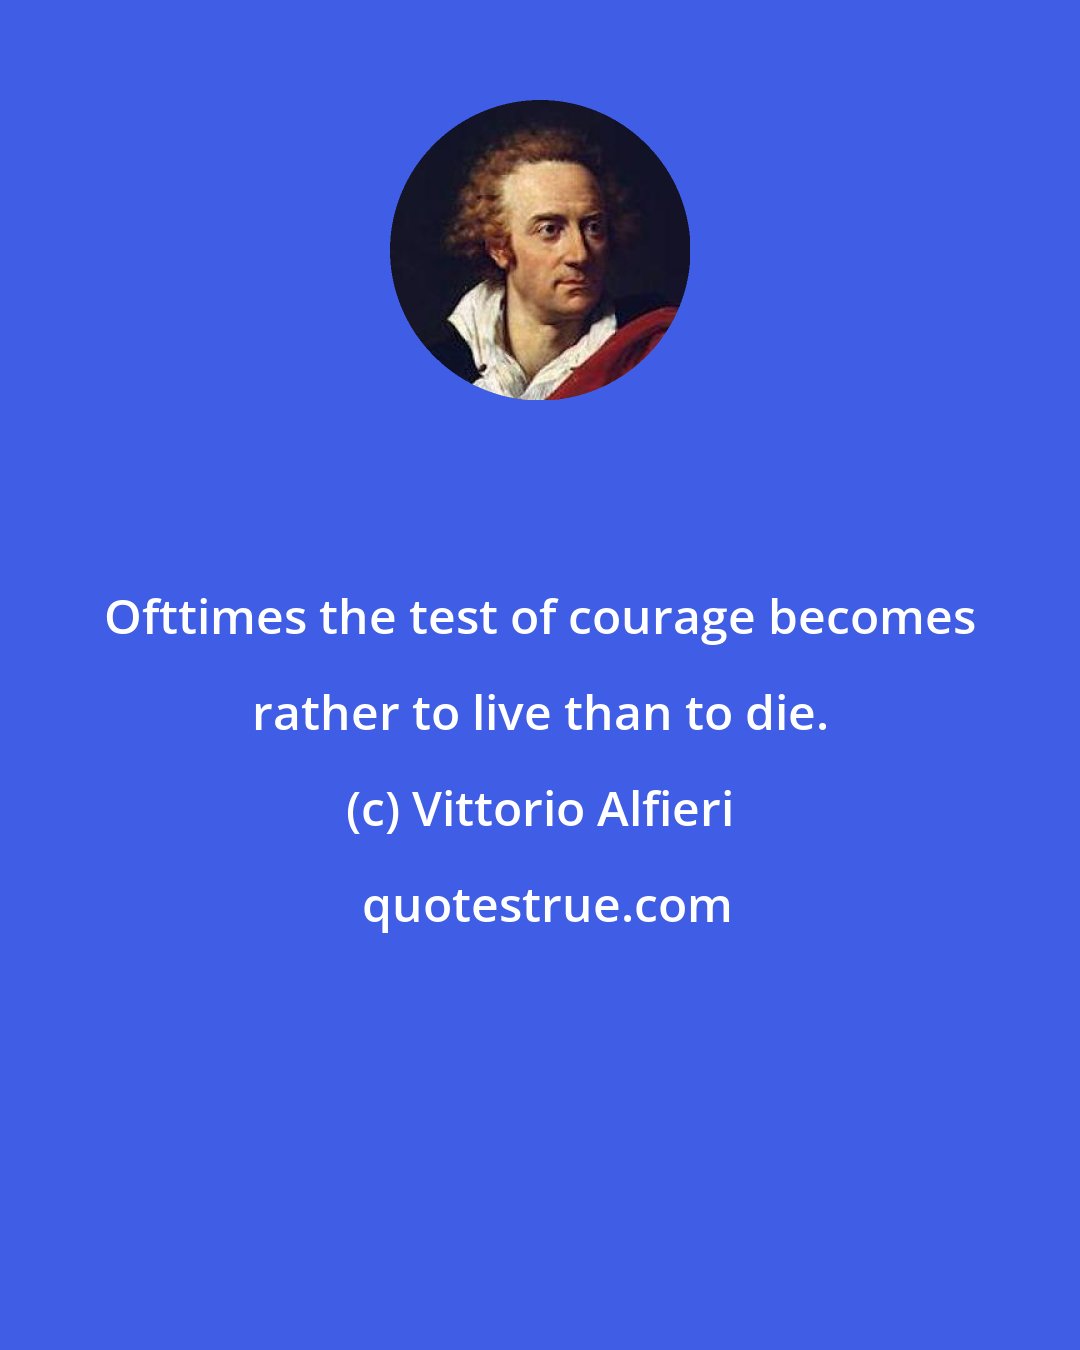 Vittorio Alfieri: Ofttimes the test of courage becomes rather to live than to die.